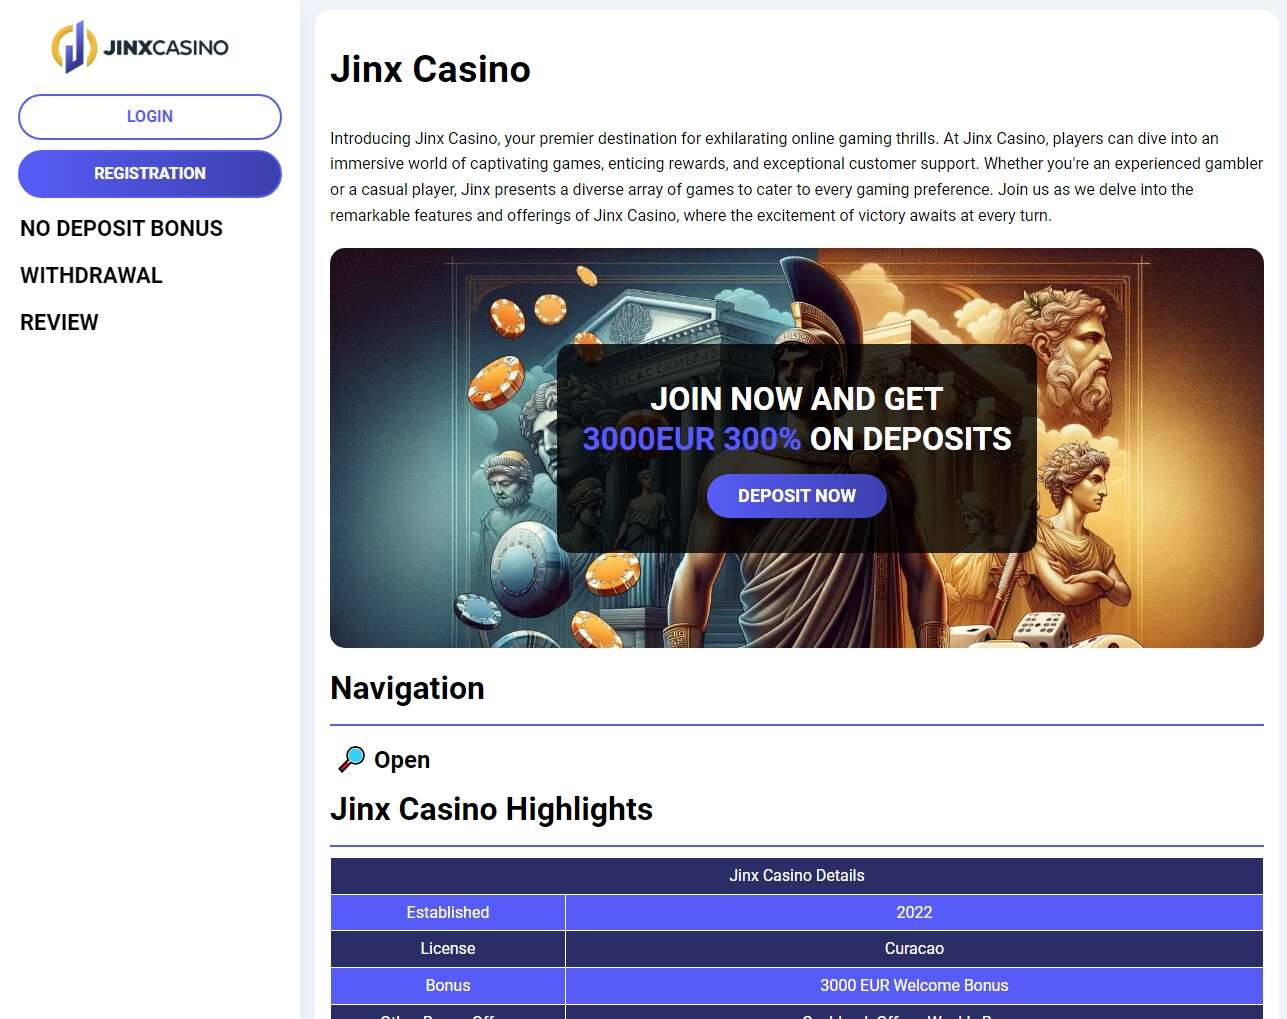 Playing on the Go: Mobile Casino Experience at Jinx Casino